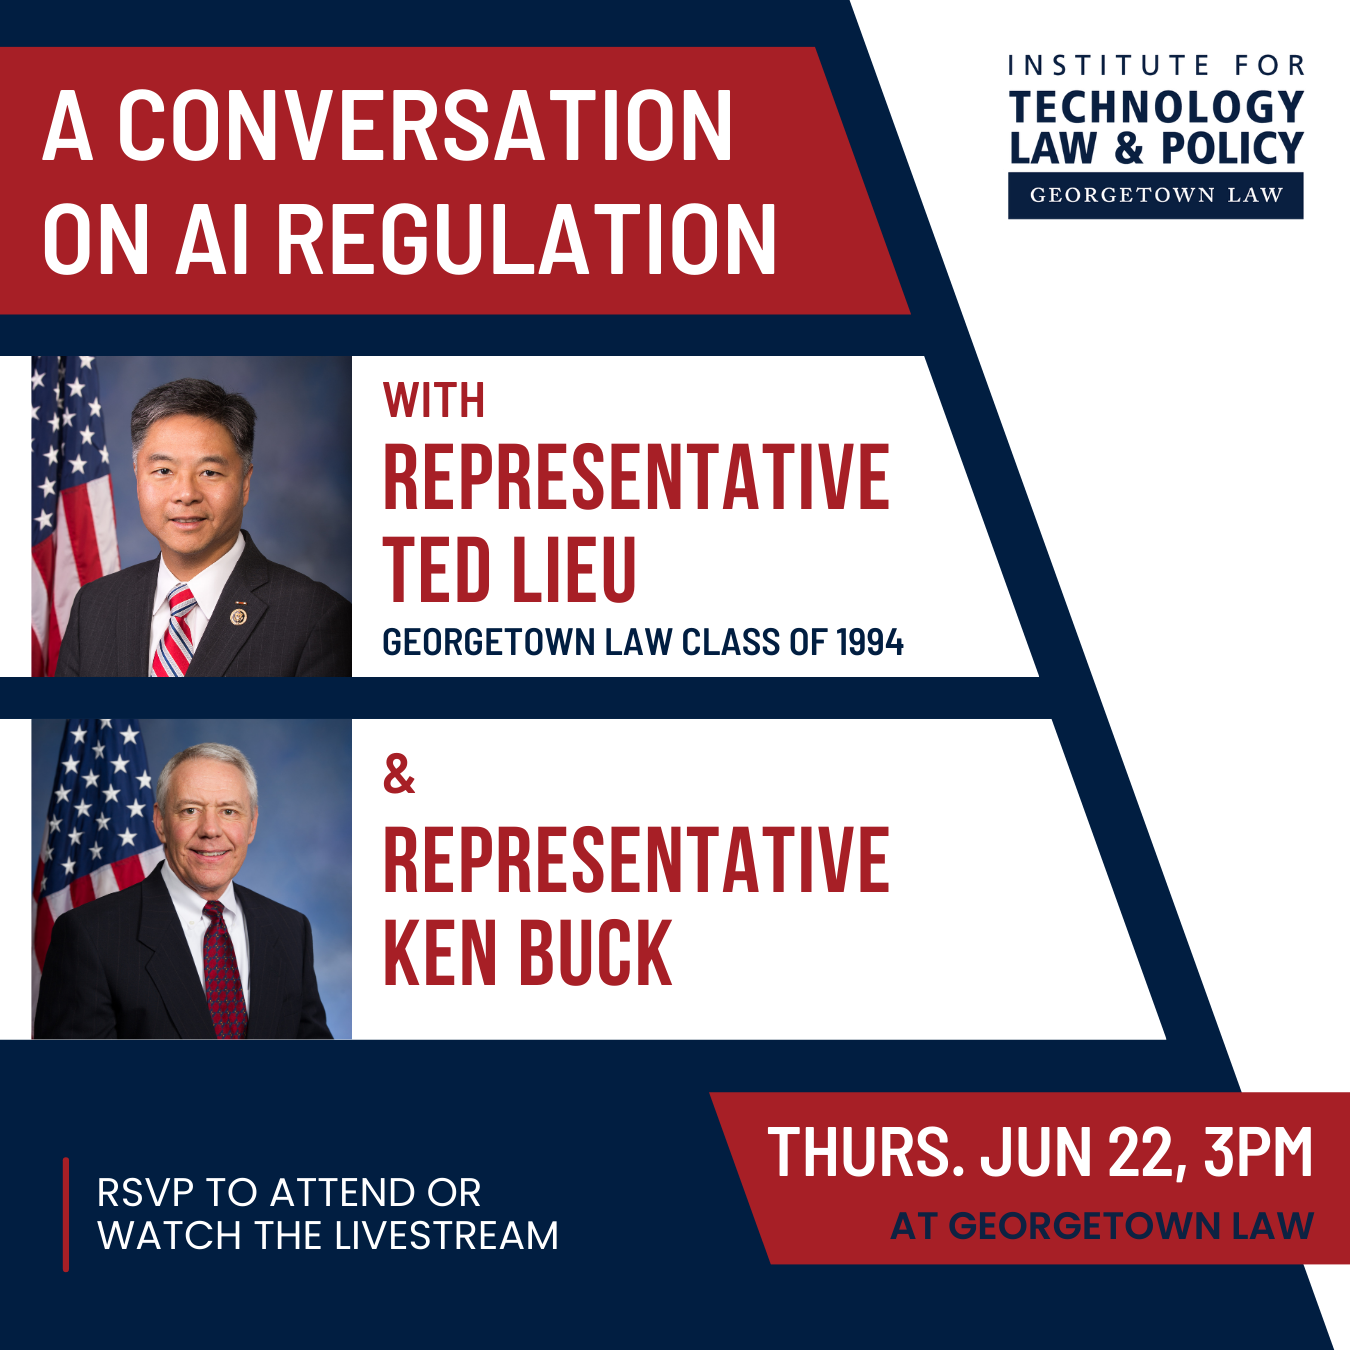 Flyer for the event: A Conversation on AI Regulation with Representative Ted Lieu and Representative Ken Buck